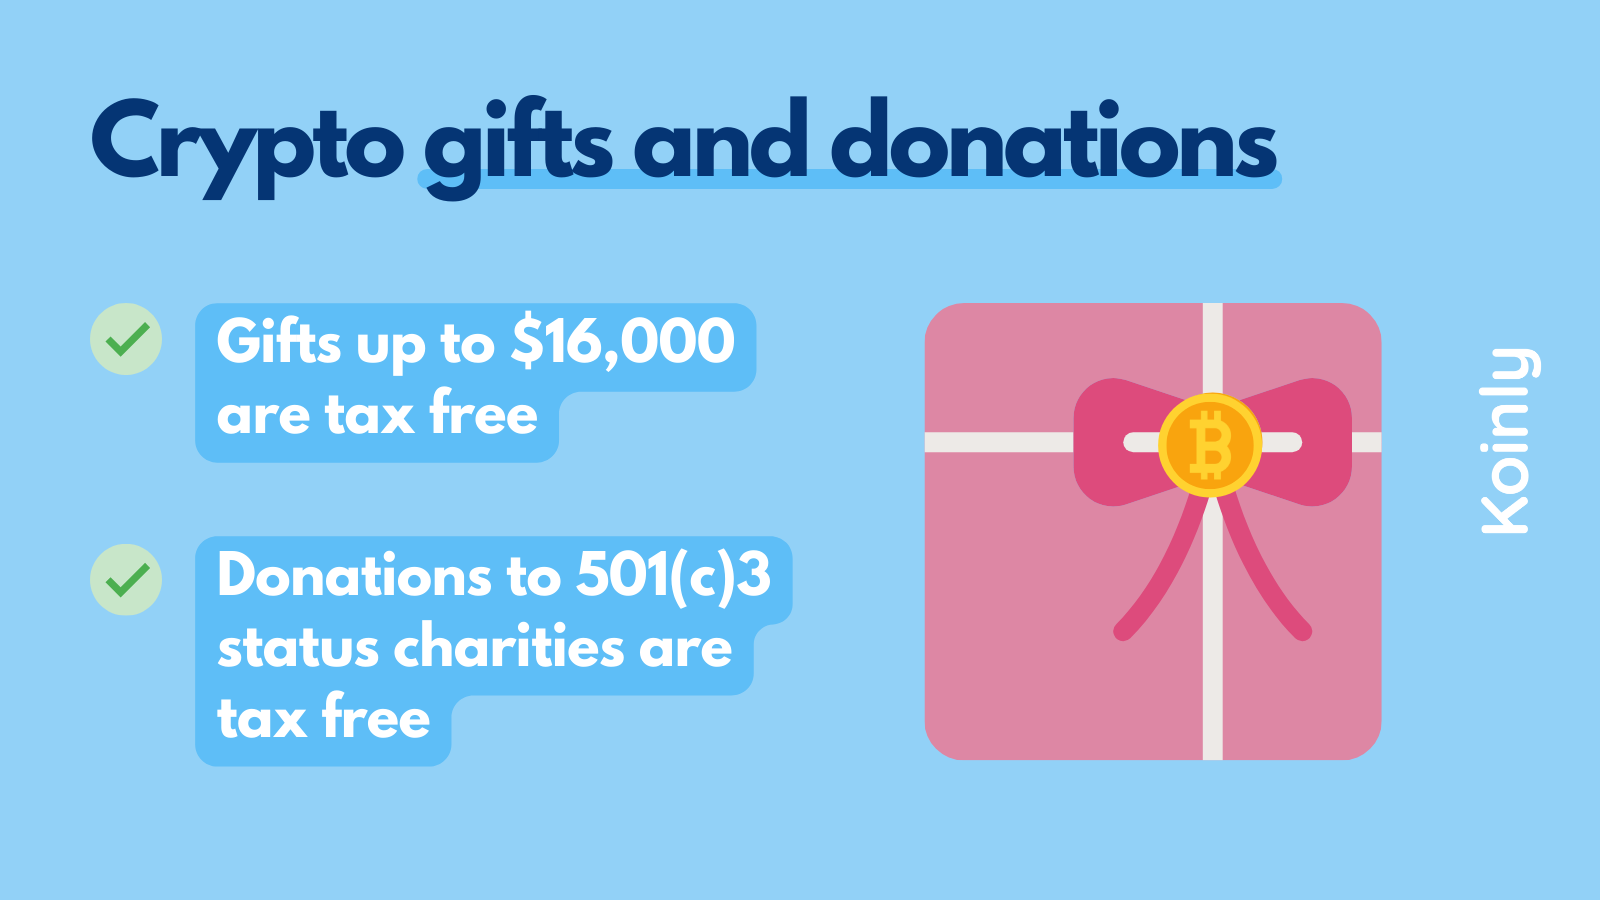 crypto gifts and donations in the US